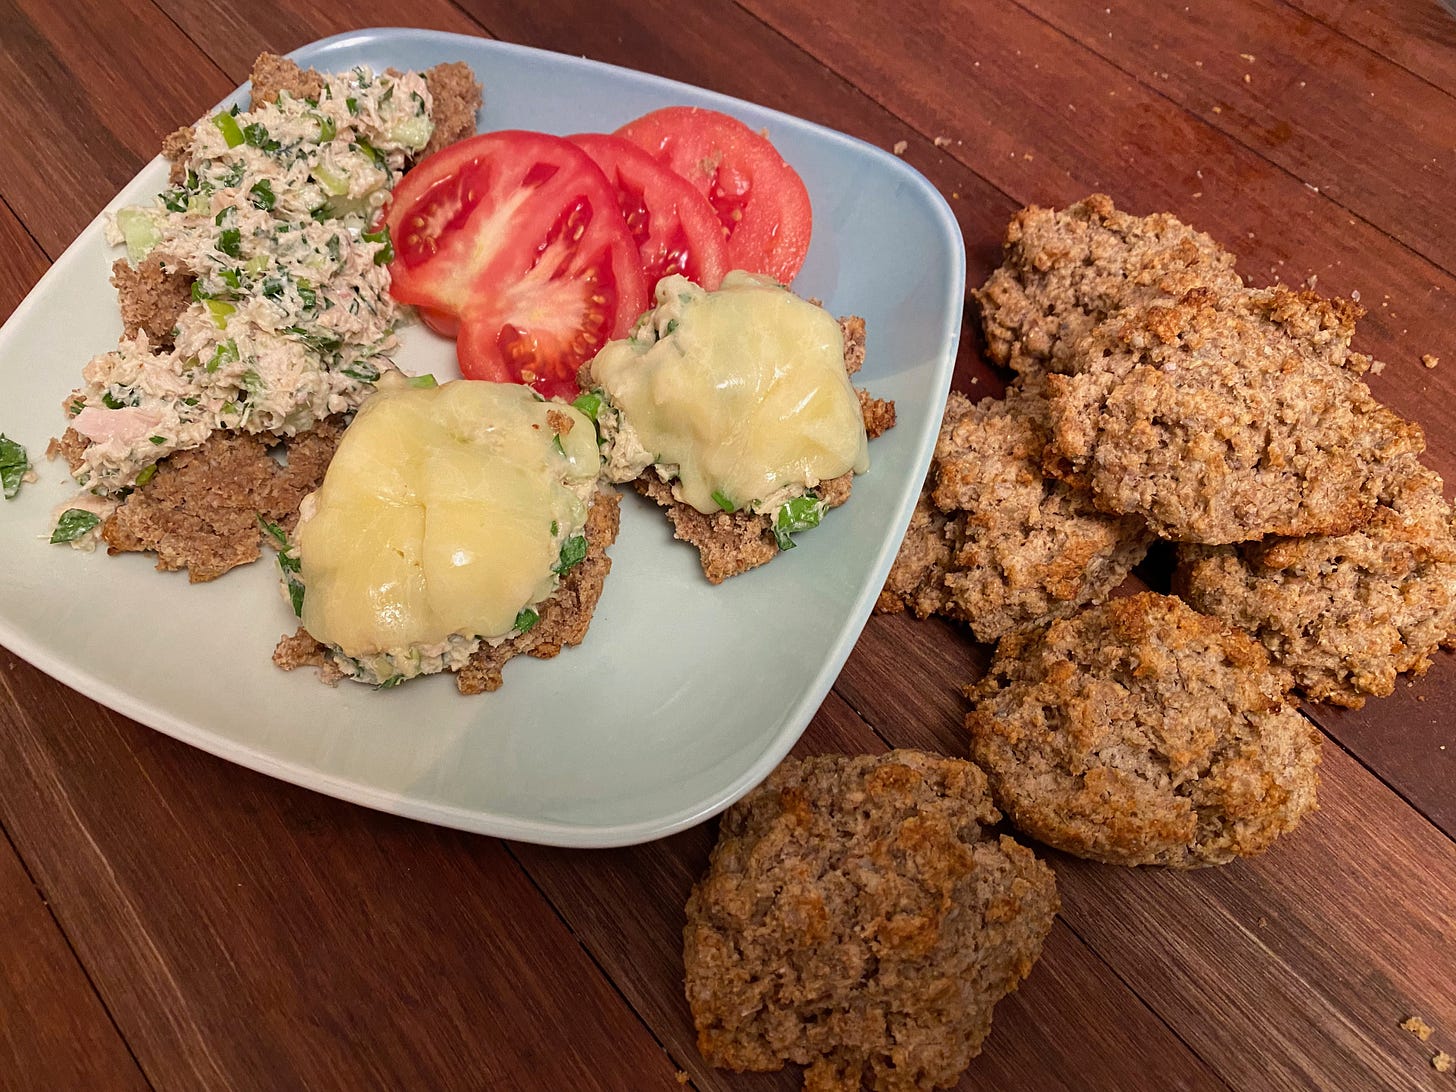 A square plate holds a pile of tuna salad, two halves of a rye biscuit made into a tuna melt, and several tomato slices. A pile of golden brown rye biscuits sits on the wooden counter beside the plate.